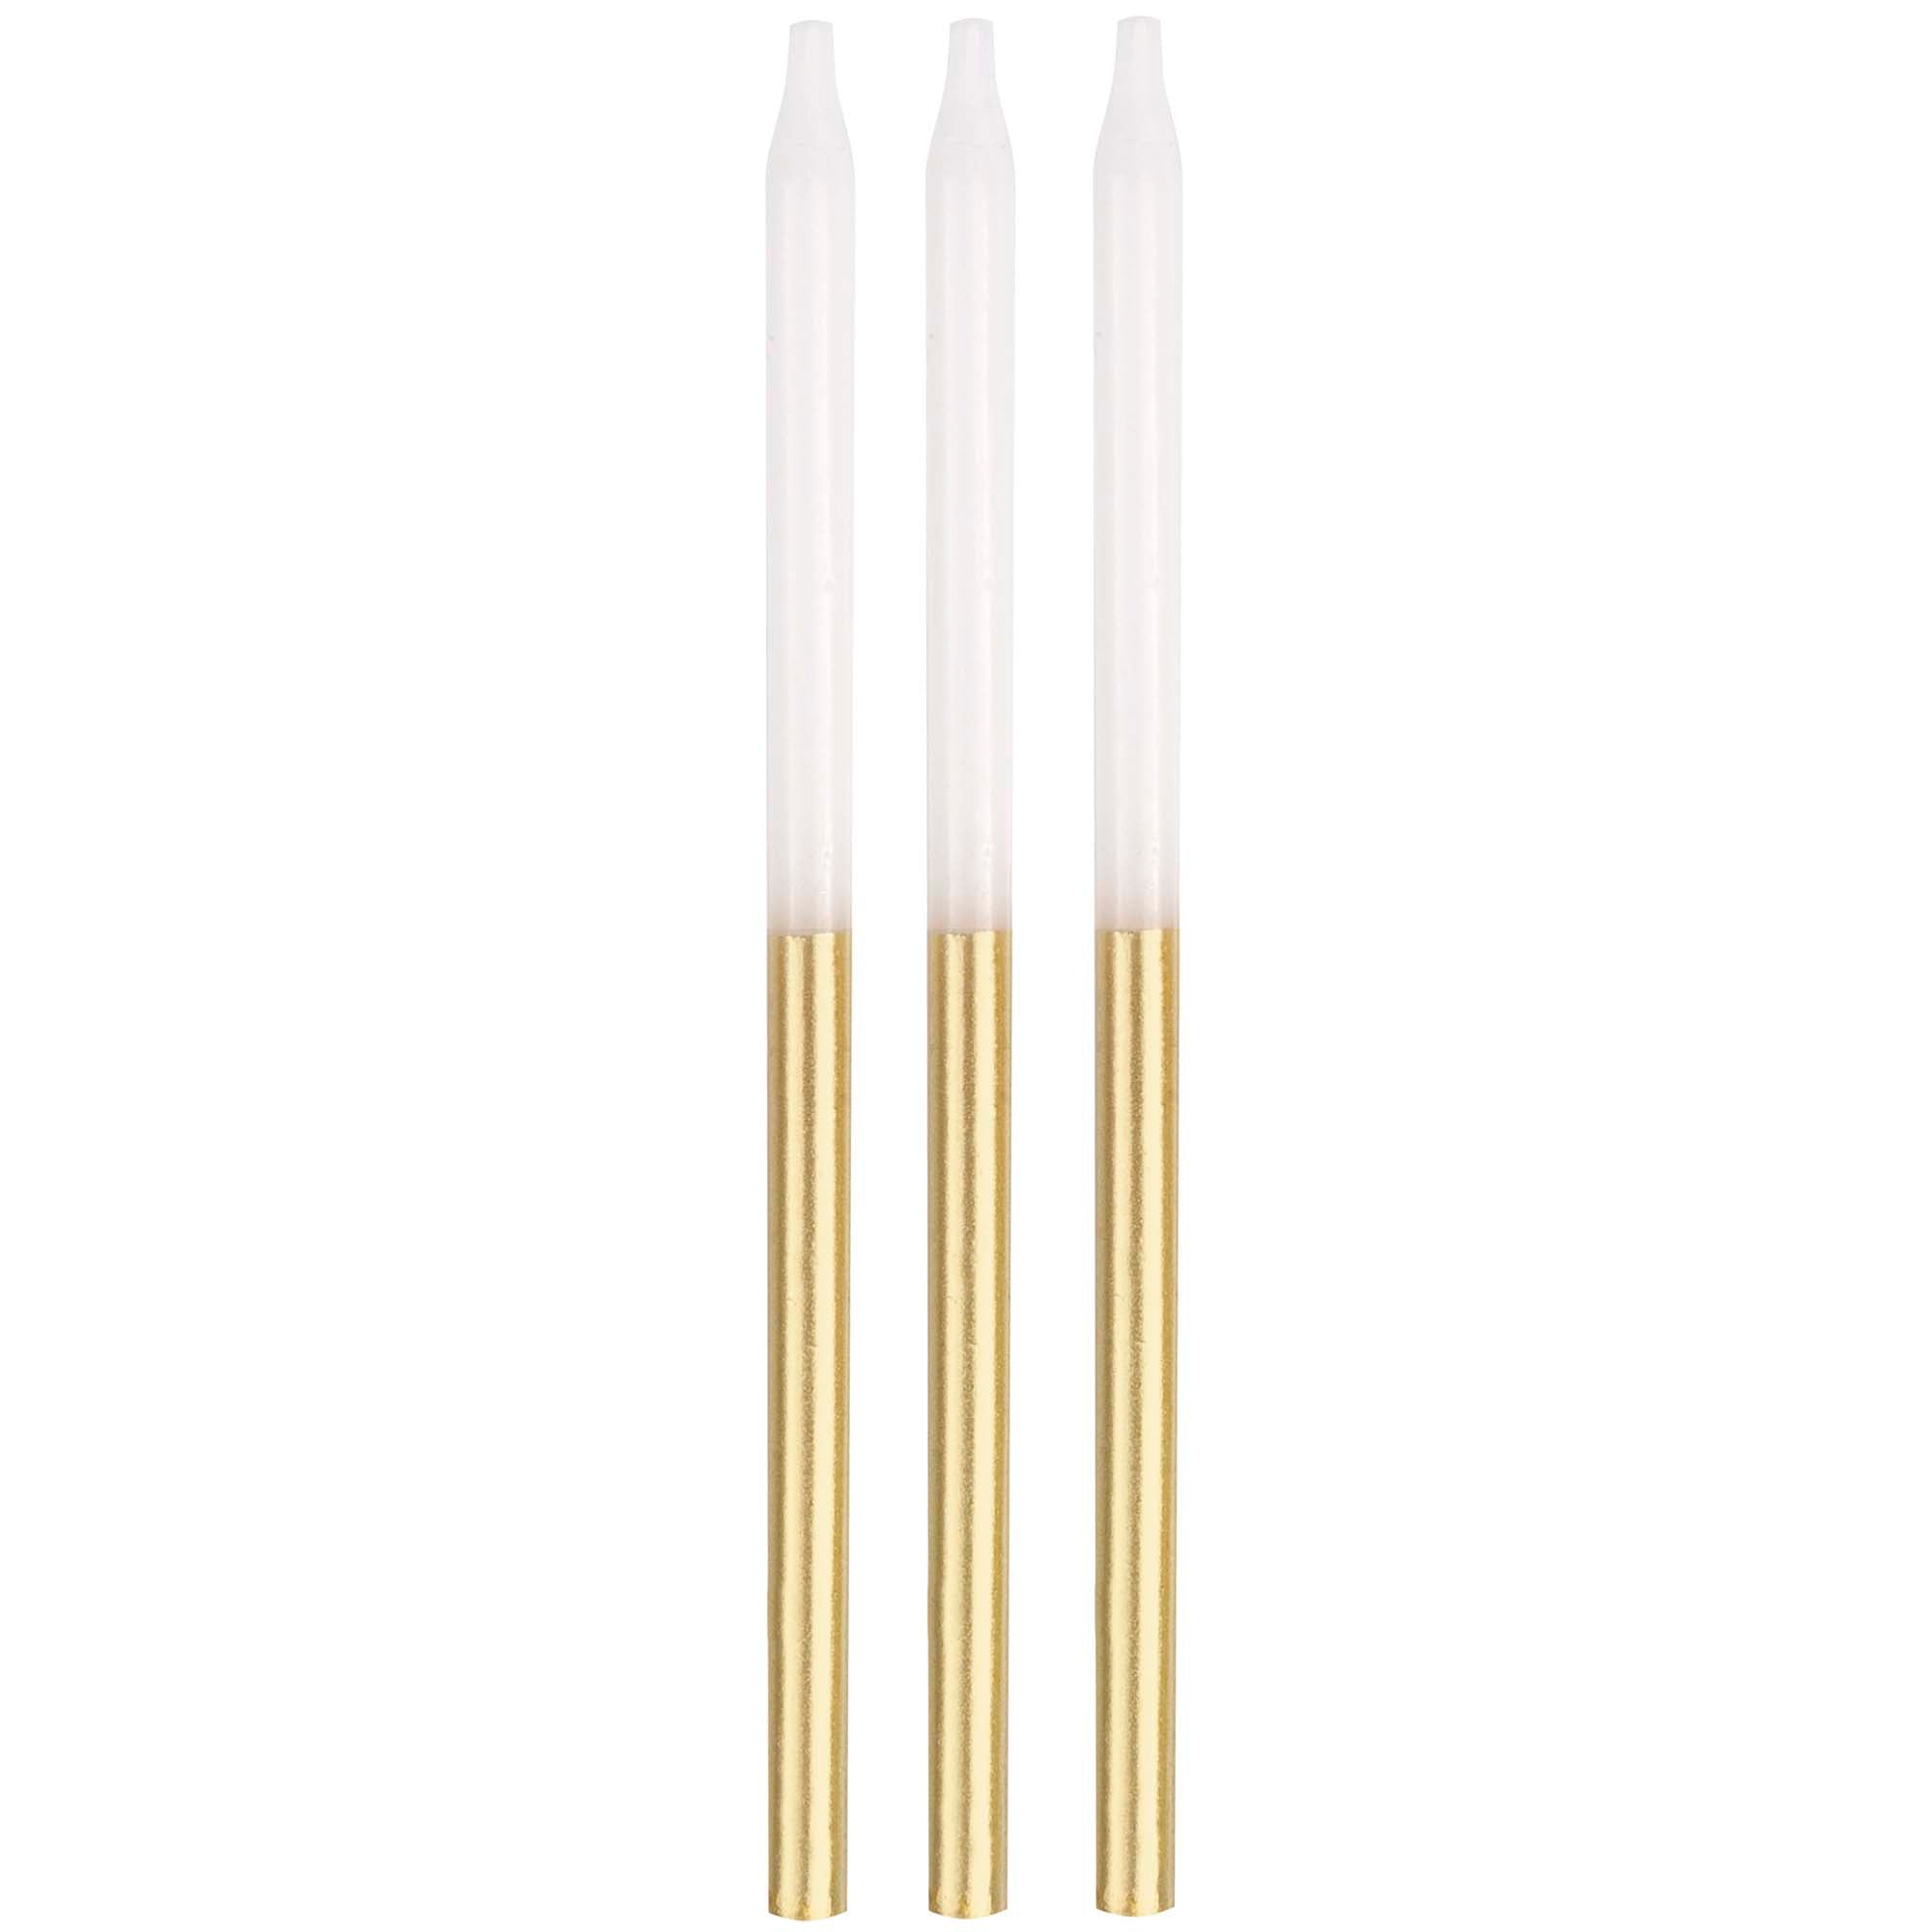 Metallic Dipped Cake Candles, 5 Inches, 12 Count